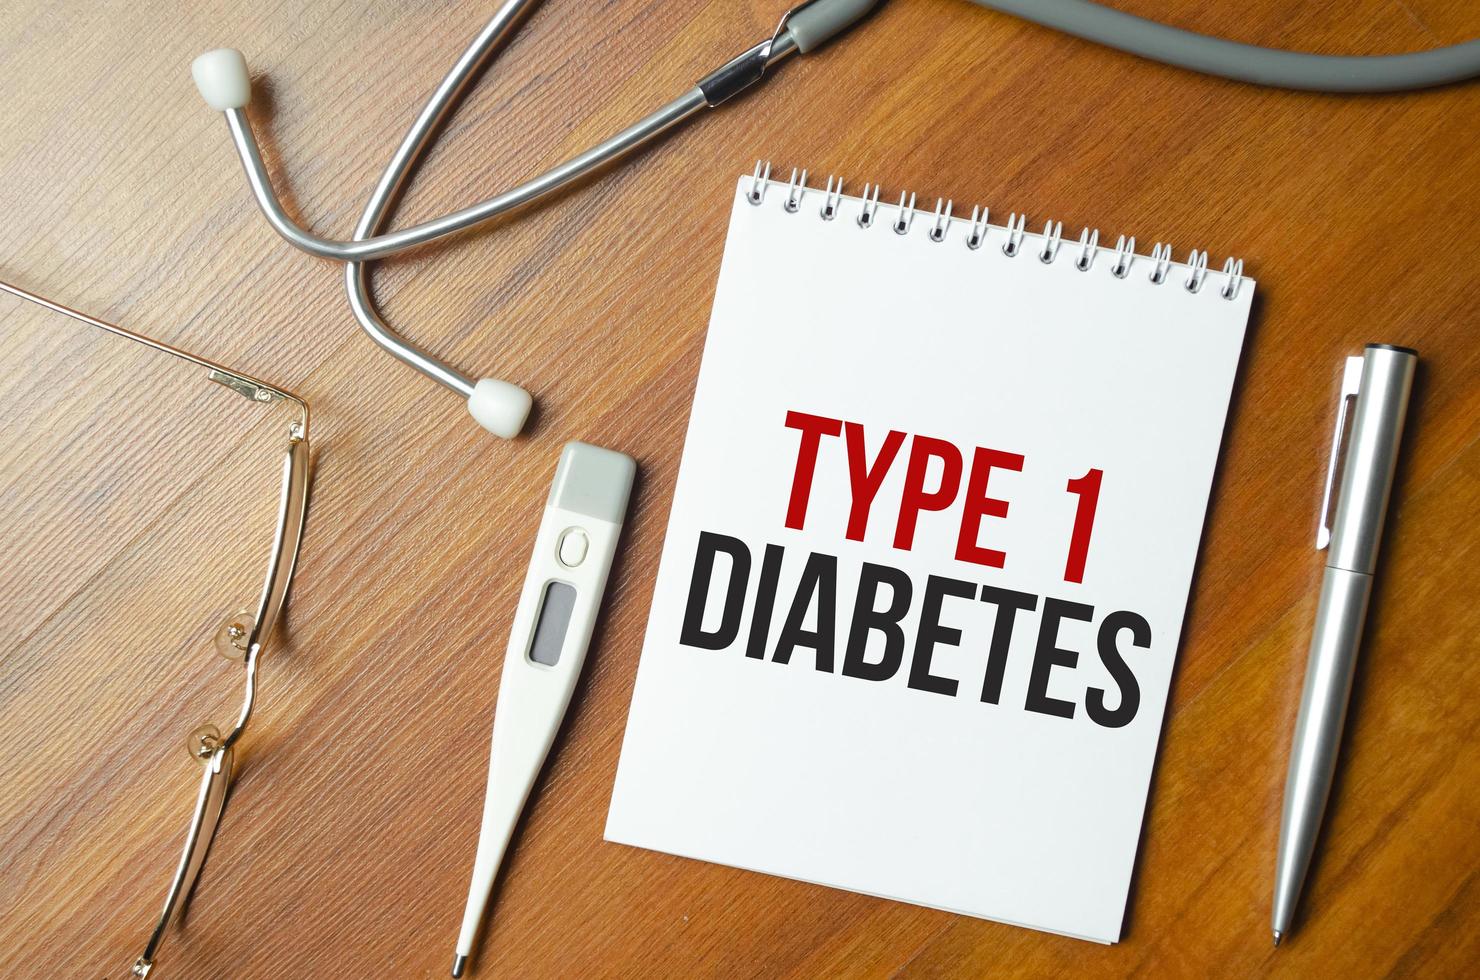 types 1 Diabetes. text on white paper in notebook near stethoscope photo